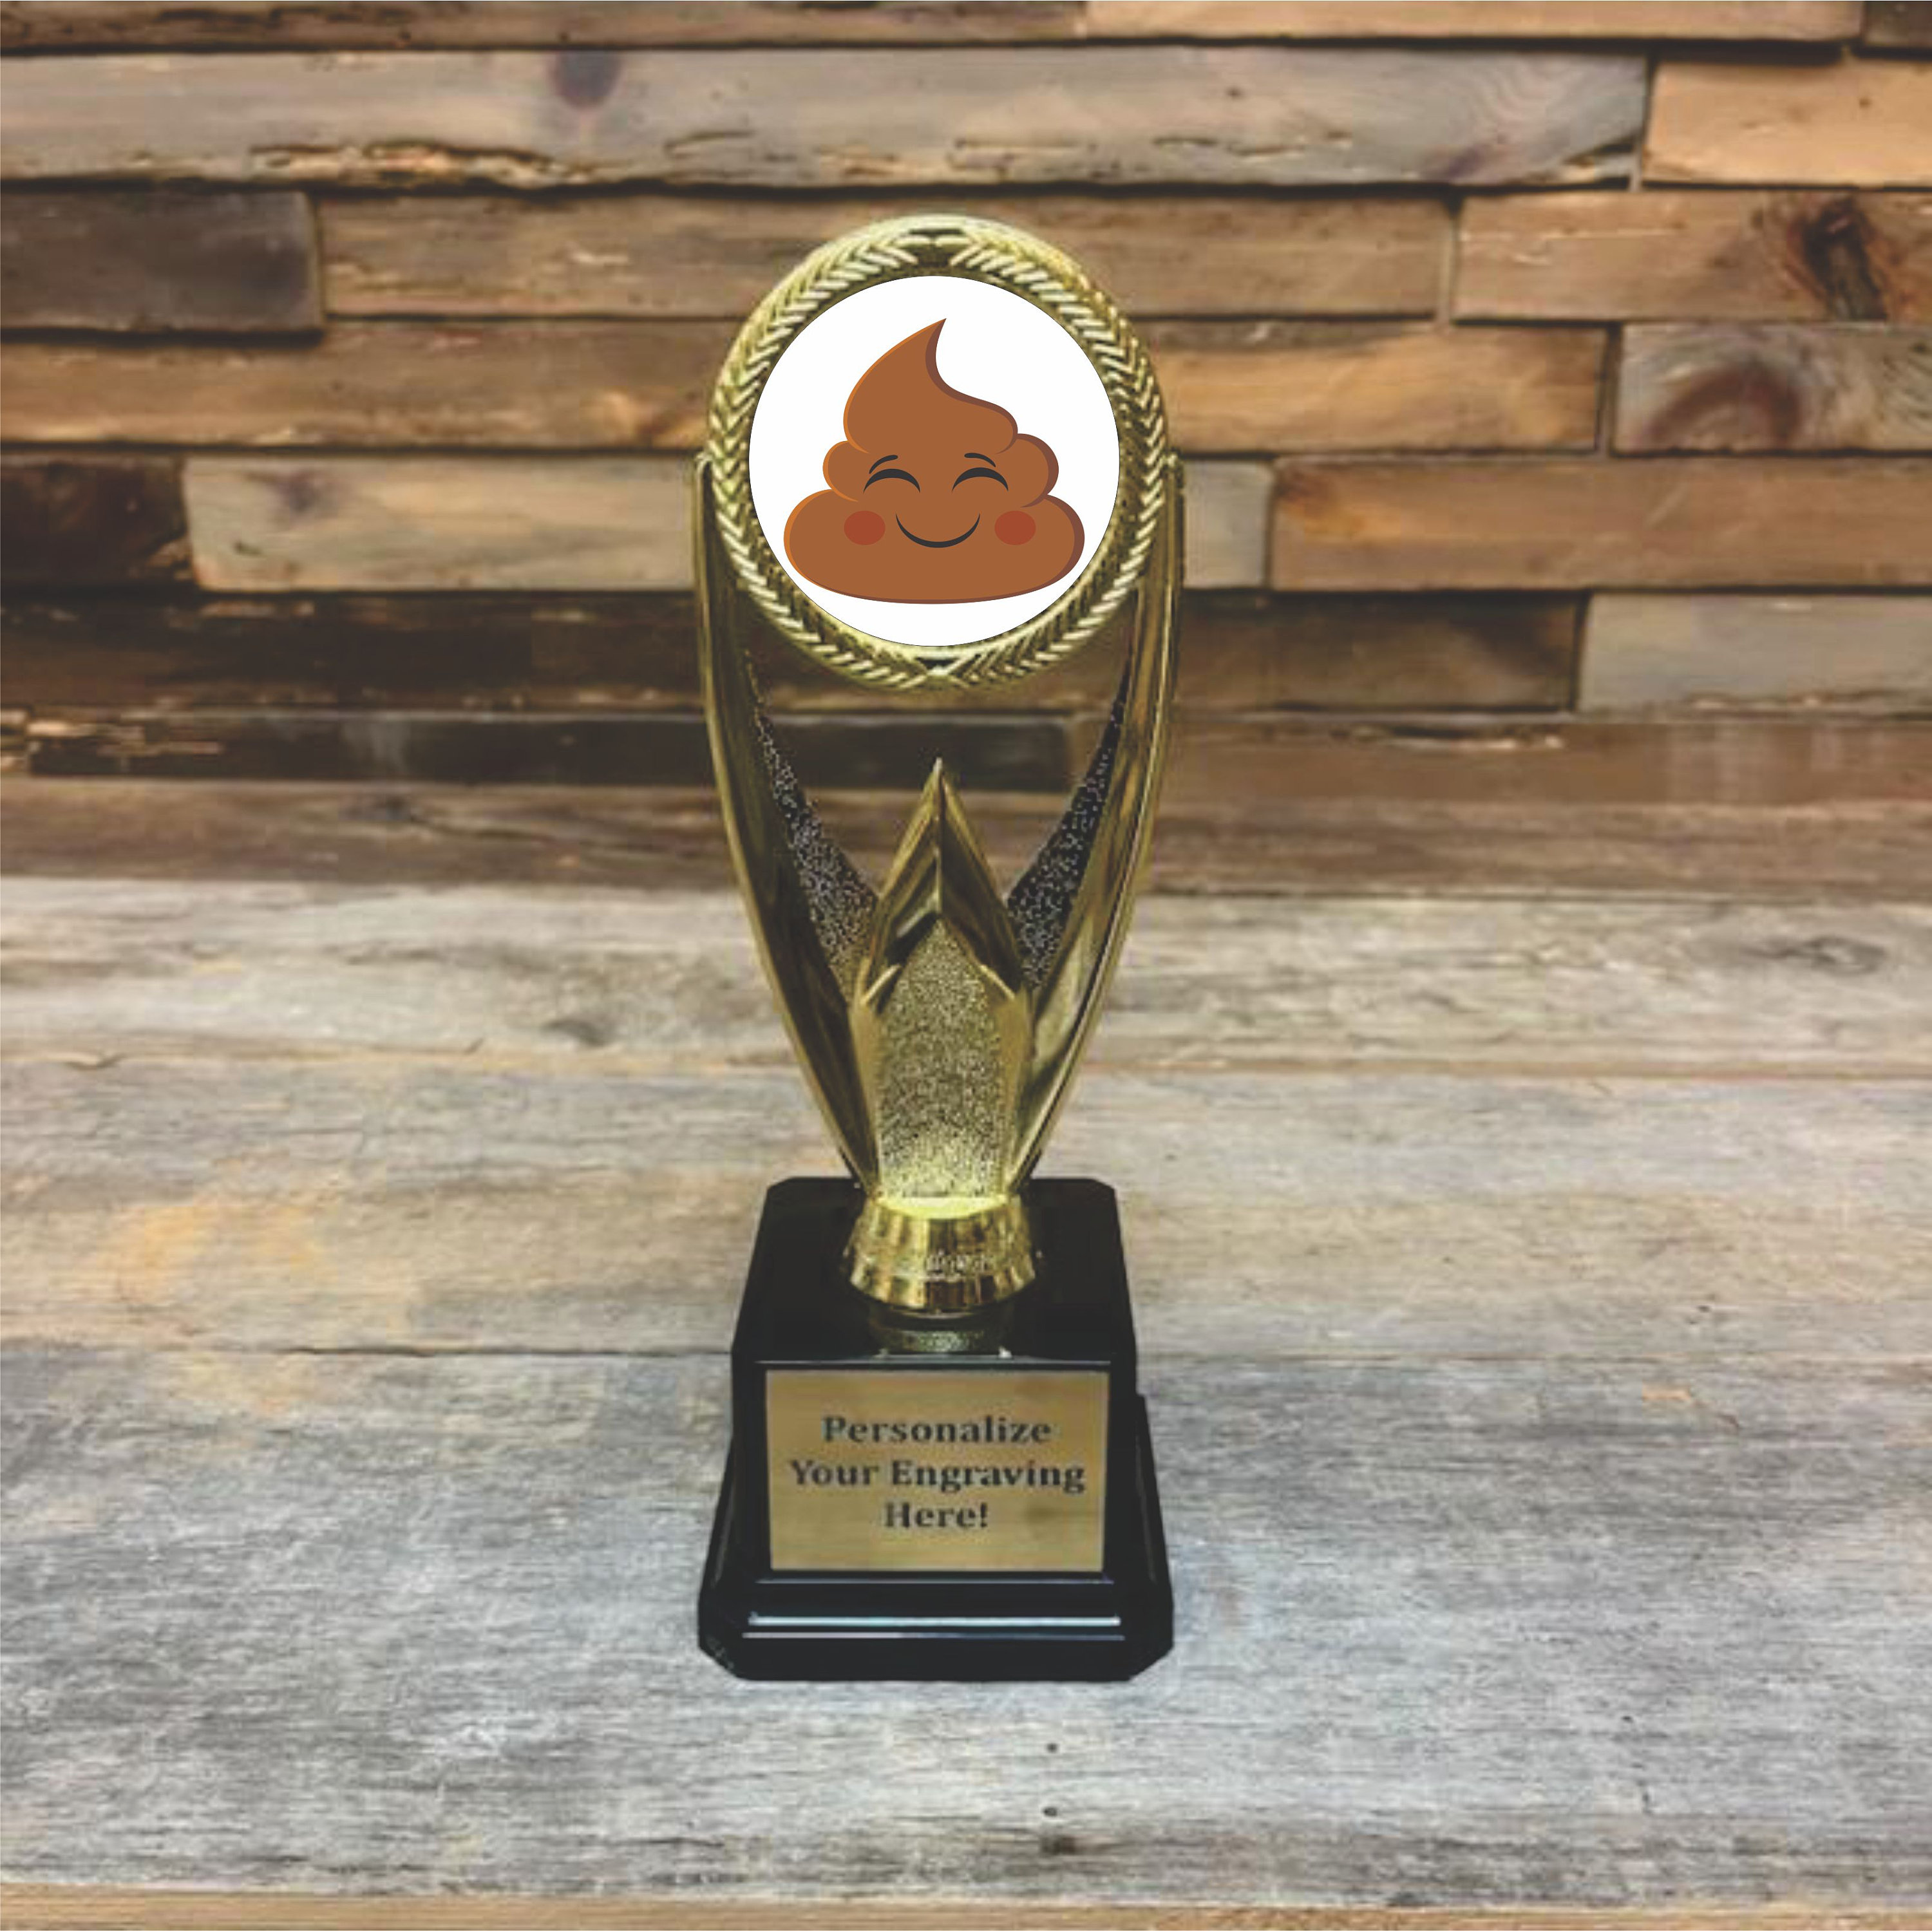 Greatest of All Time Trophy - GOAT - The Goat Trophy Award with Option for  Customized Engraving - Funny Trophy to Recognize Boss, Co-Workers, Friends